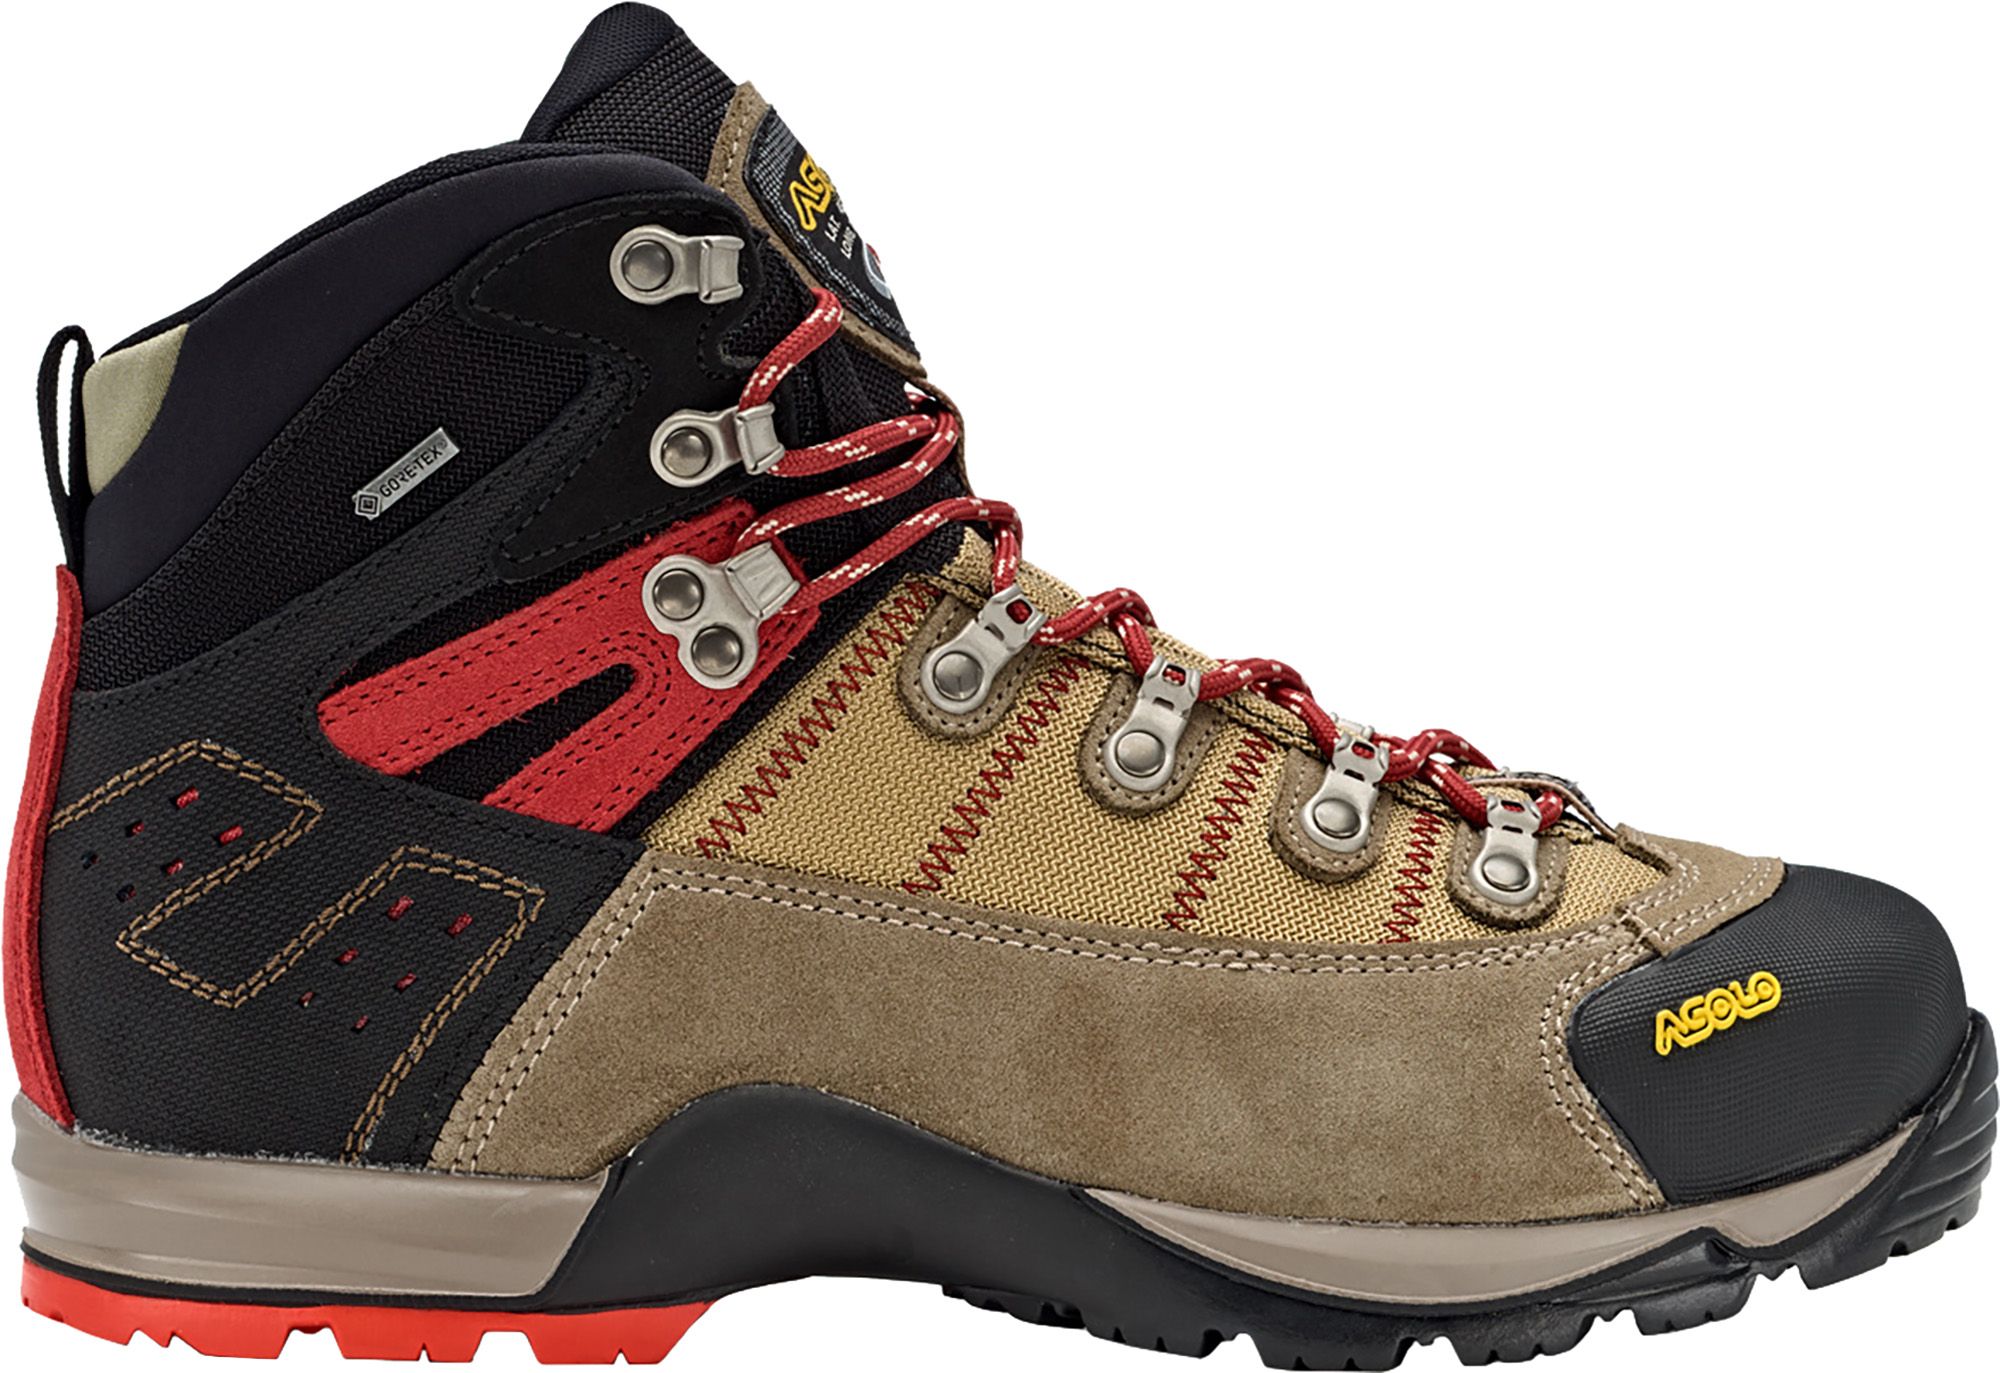 Photos - Trekking Shoes ASOLO Men's Fugitive GTX Hiking Boots, Size 10, Wool/Black | Father's Day 